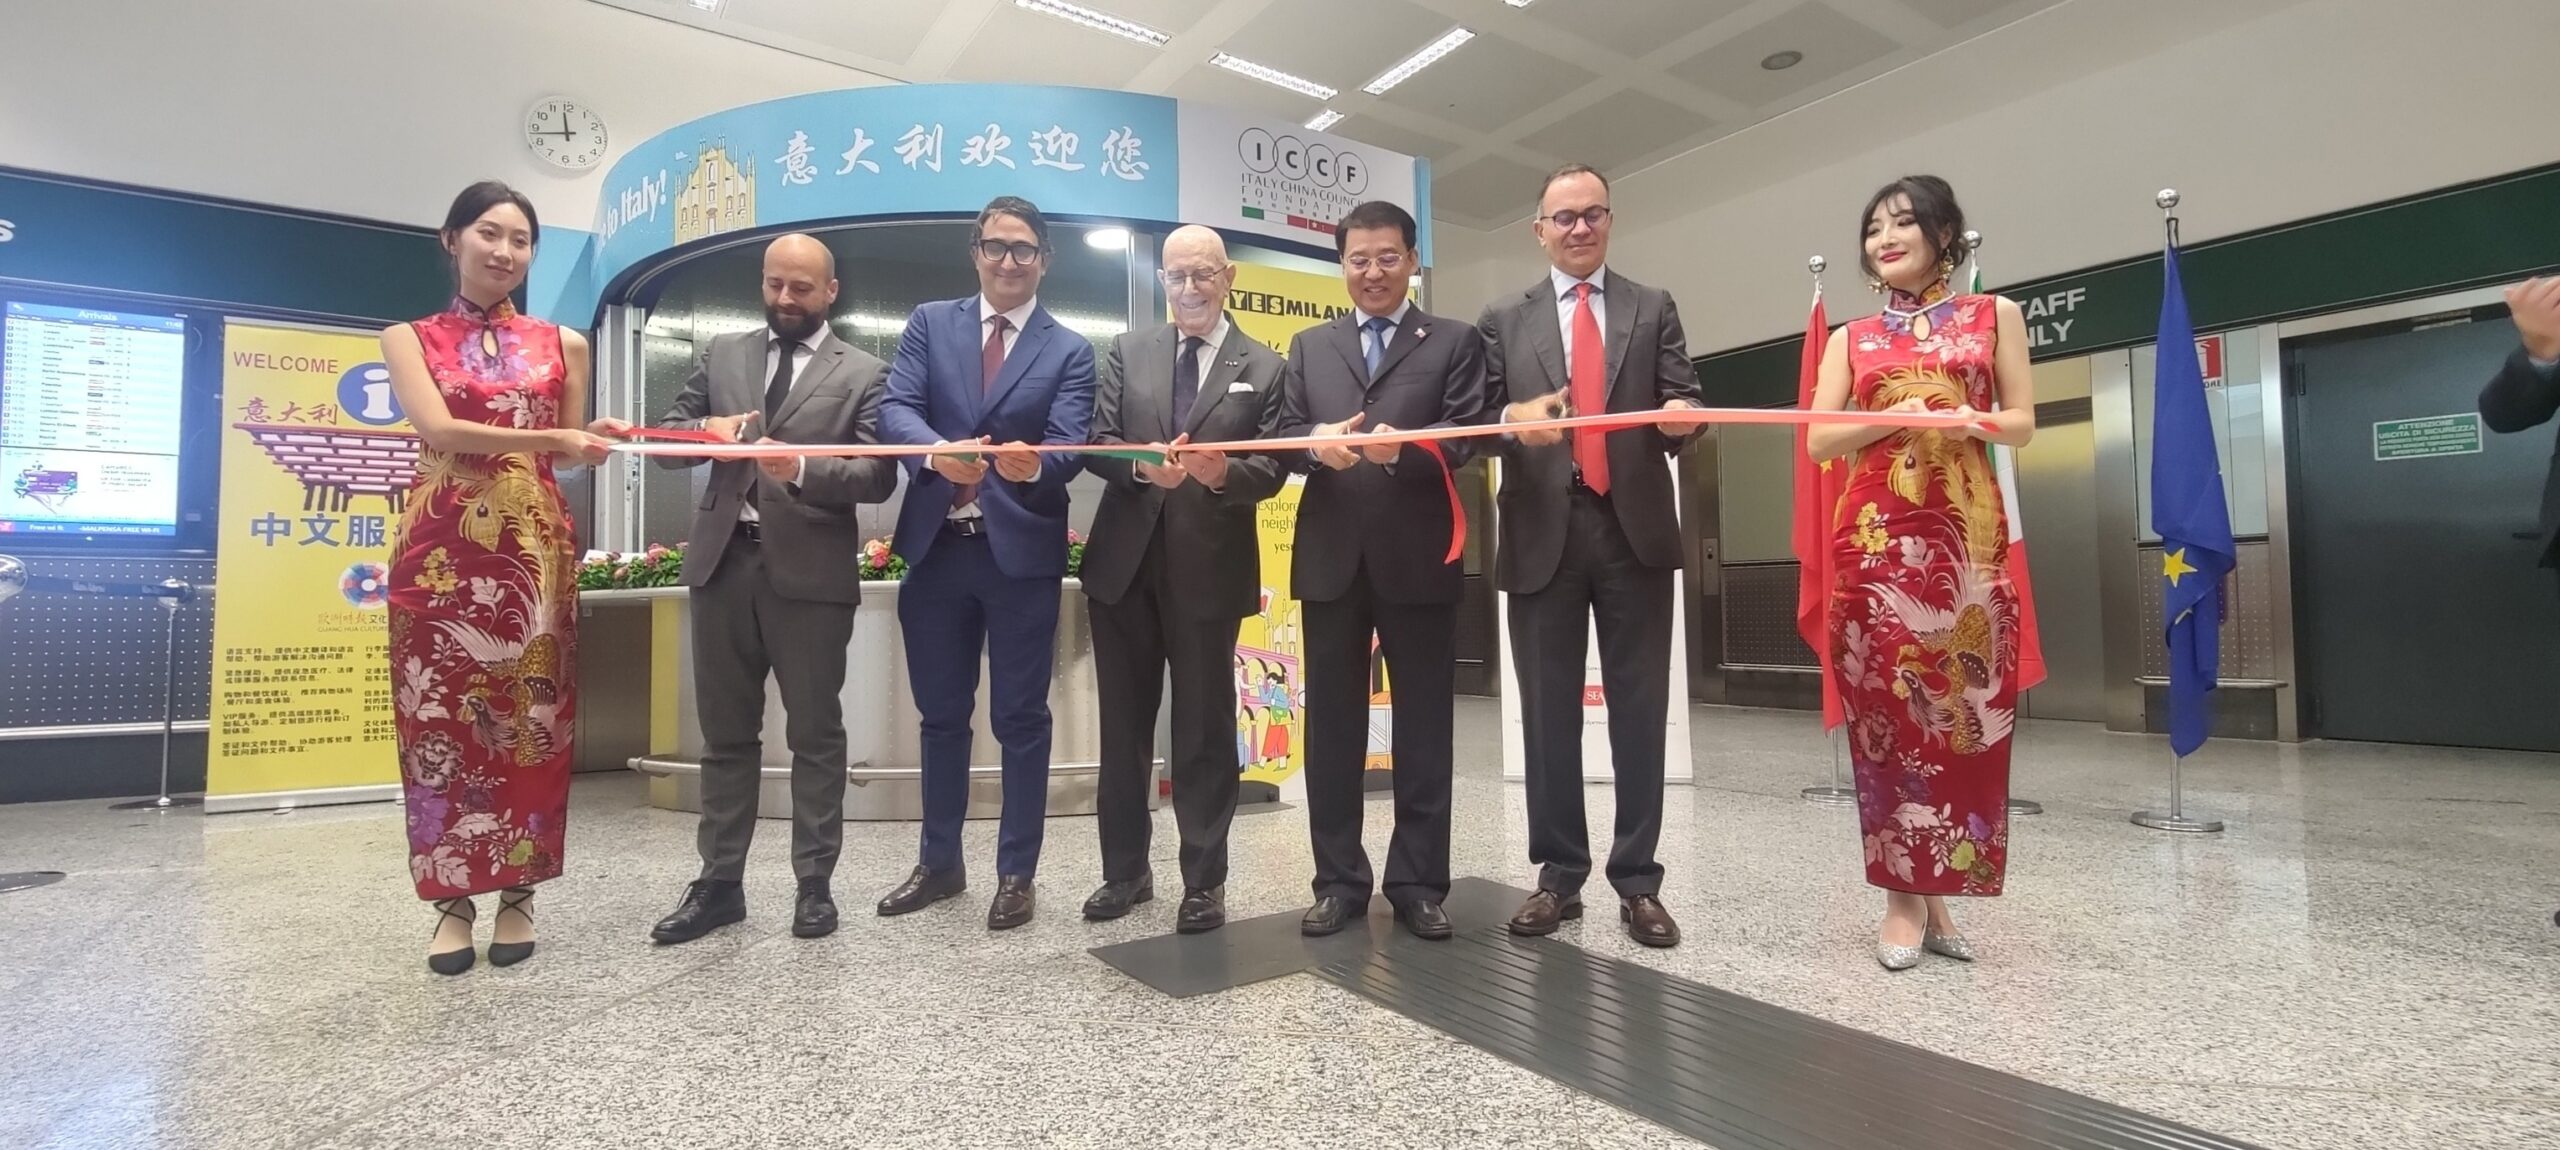 <trp-post-container>Malpensa: WELCOME TO ITALY, a new service for Chinese tourists, kicks off